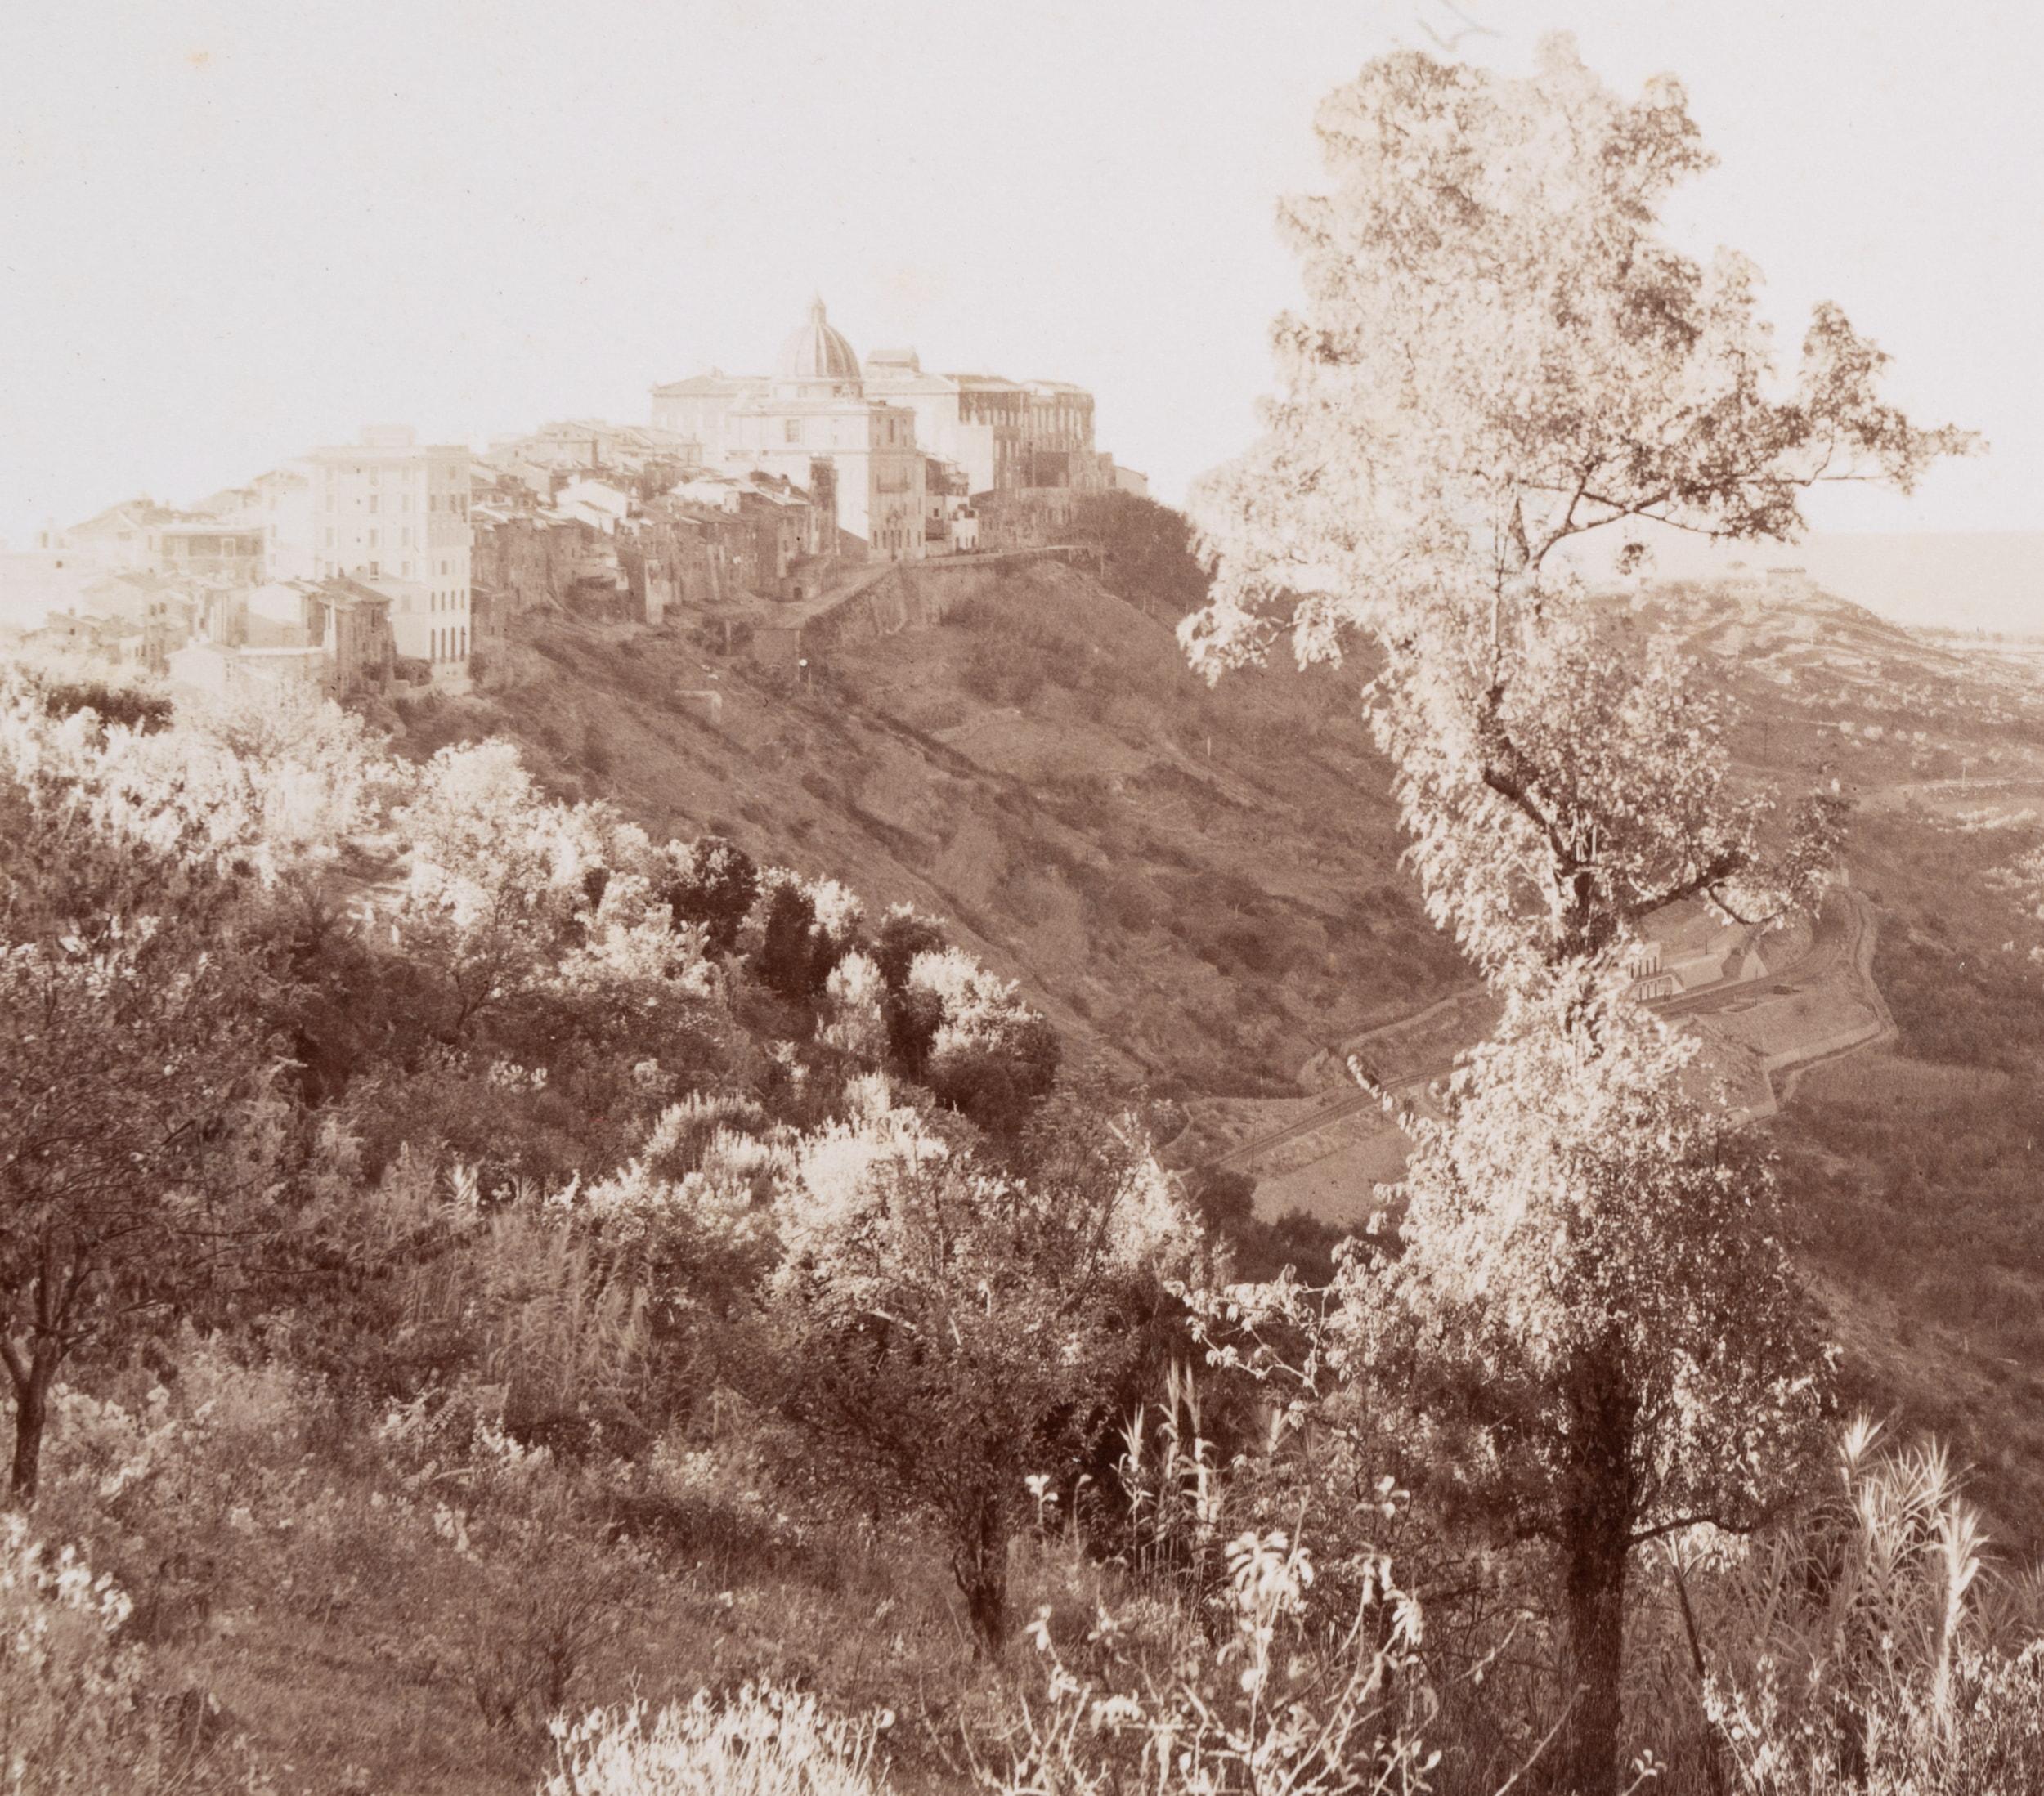 Domenico Anderson (1854 Rom - 1938 ibid.): Panoramic view of Castel Gandolfo above Lake Albano in the Albano Mountains, c. 1880, albumen paper print

Technique: albumen paper print, mounted on Cardboard

Inscription: Lower middle inscribed on the